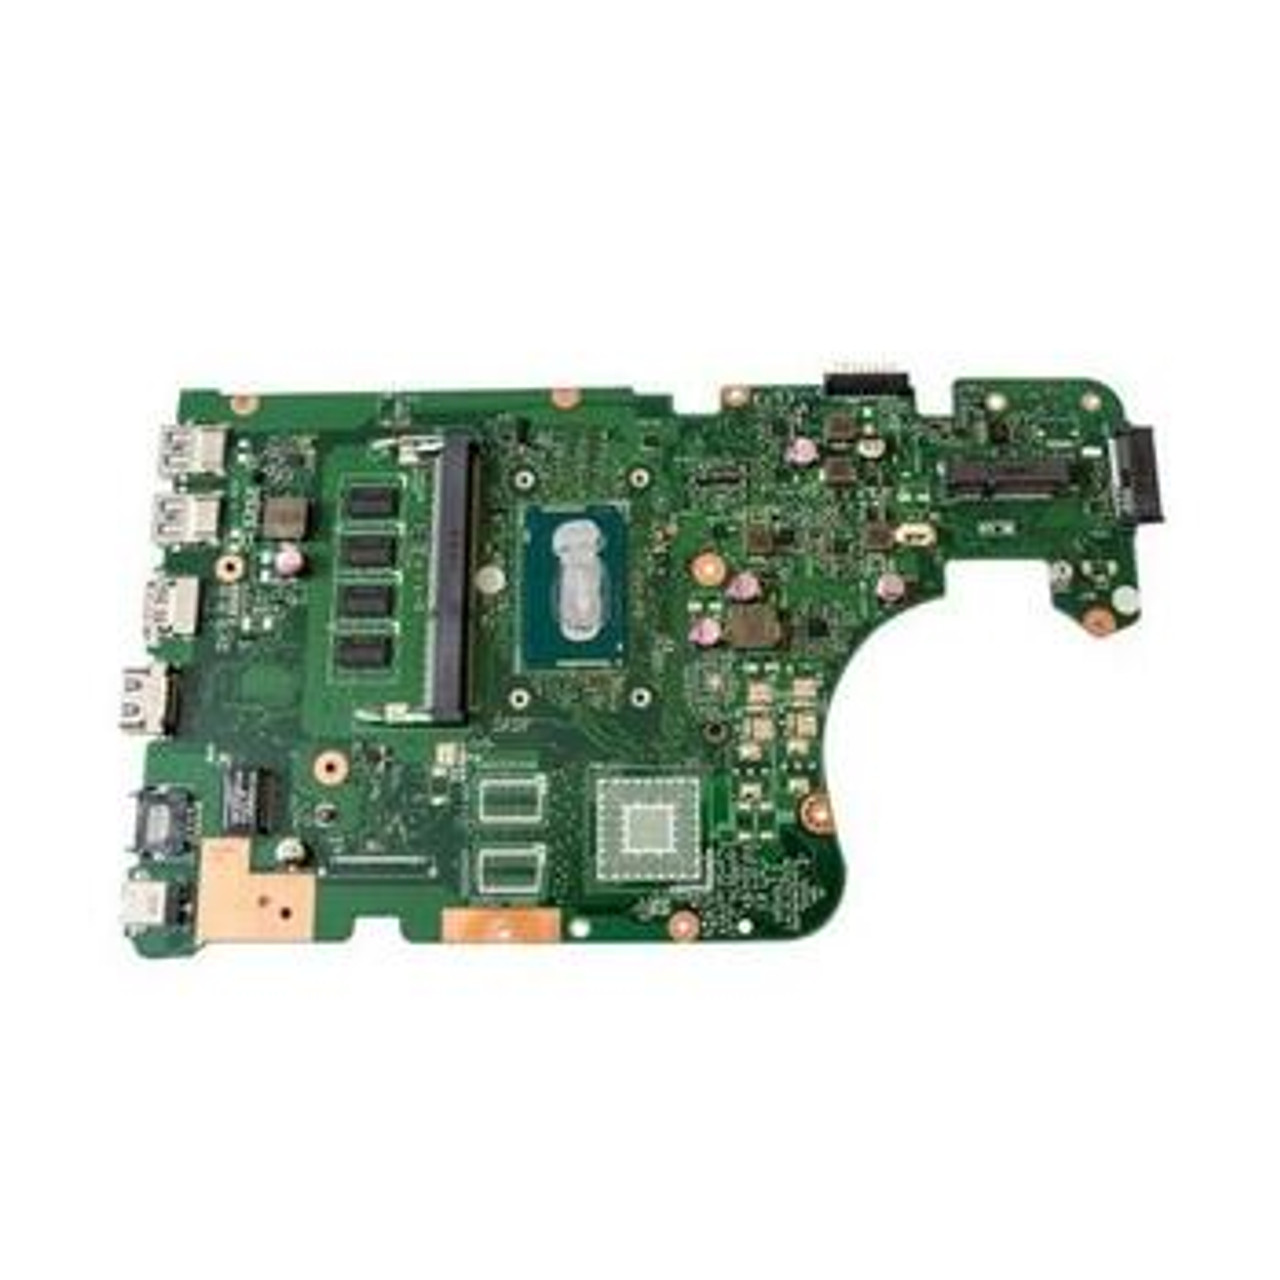 60NB0650-MB1610 ASUS System Board (Motherboard) with Intel Core i5-4210u 1.7GHz Processor for X555LA Laptop